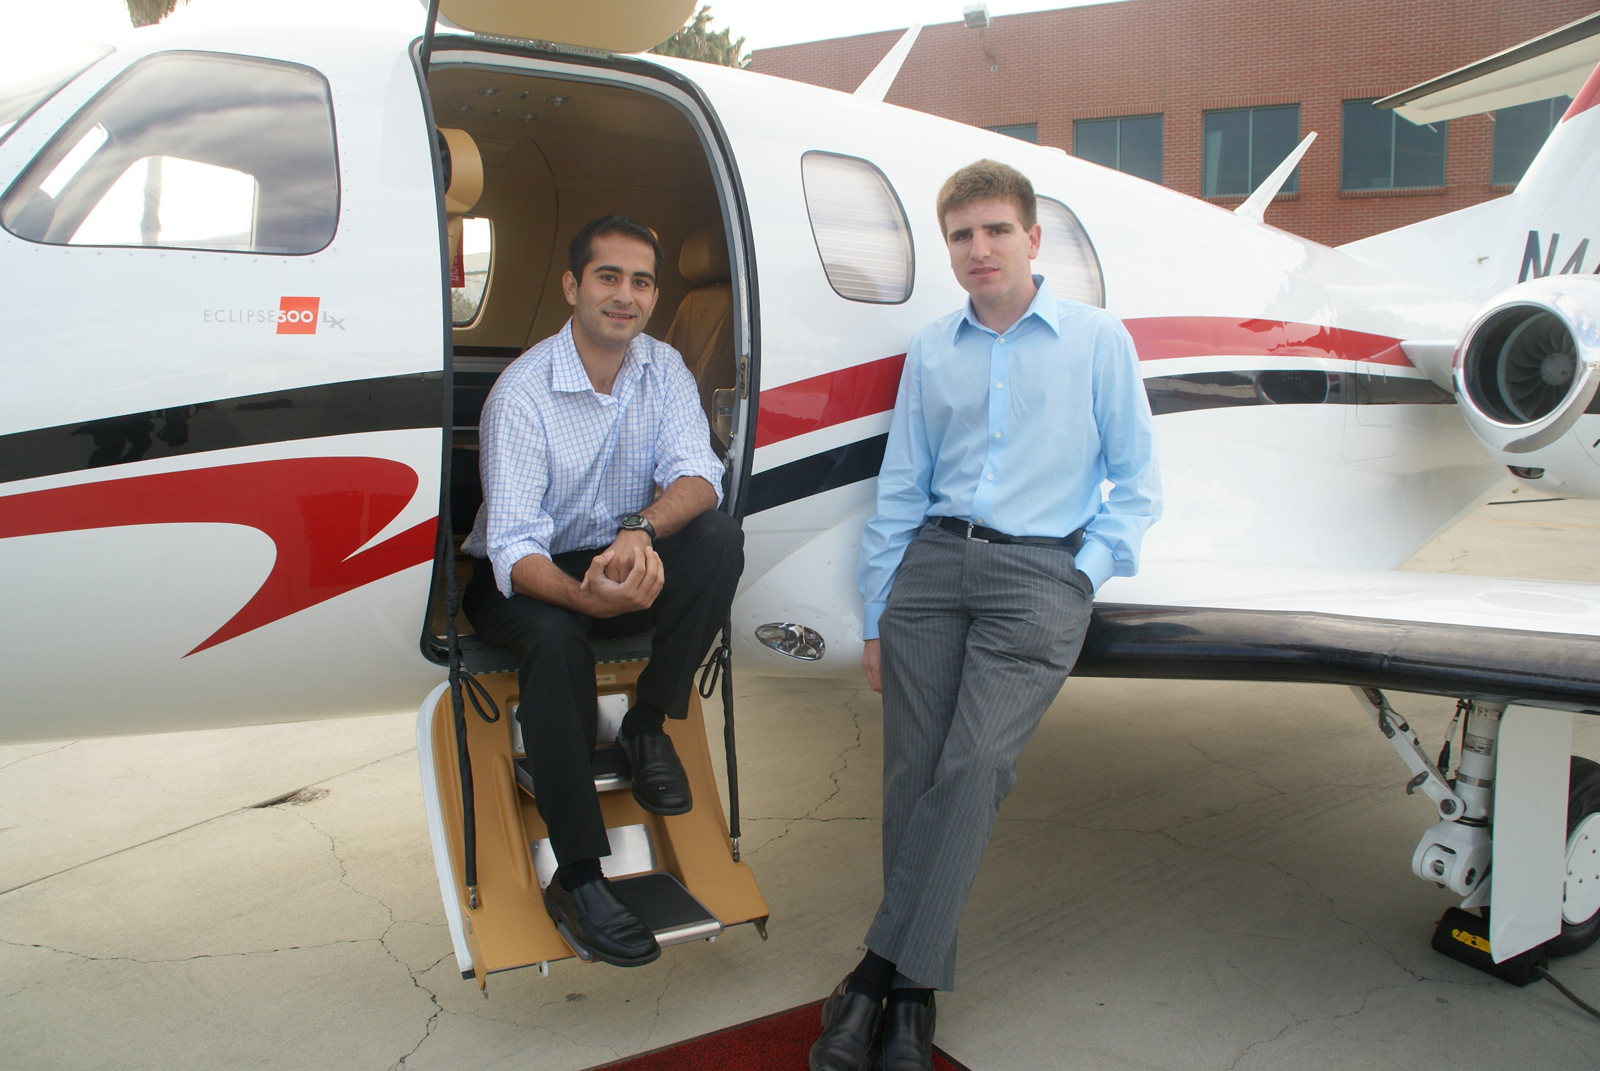 jetAVIVA Offers Full-Service Management to Eclipse 500 Owners